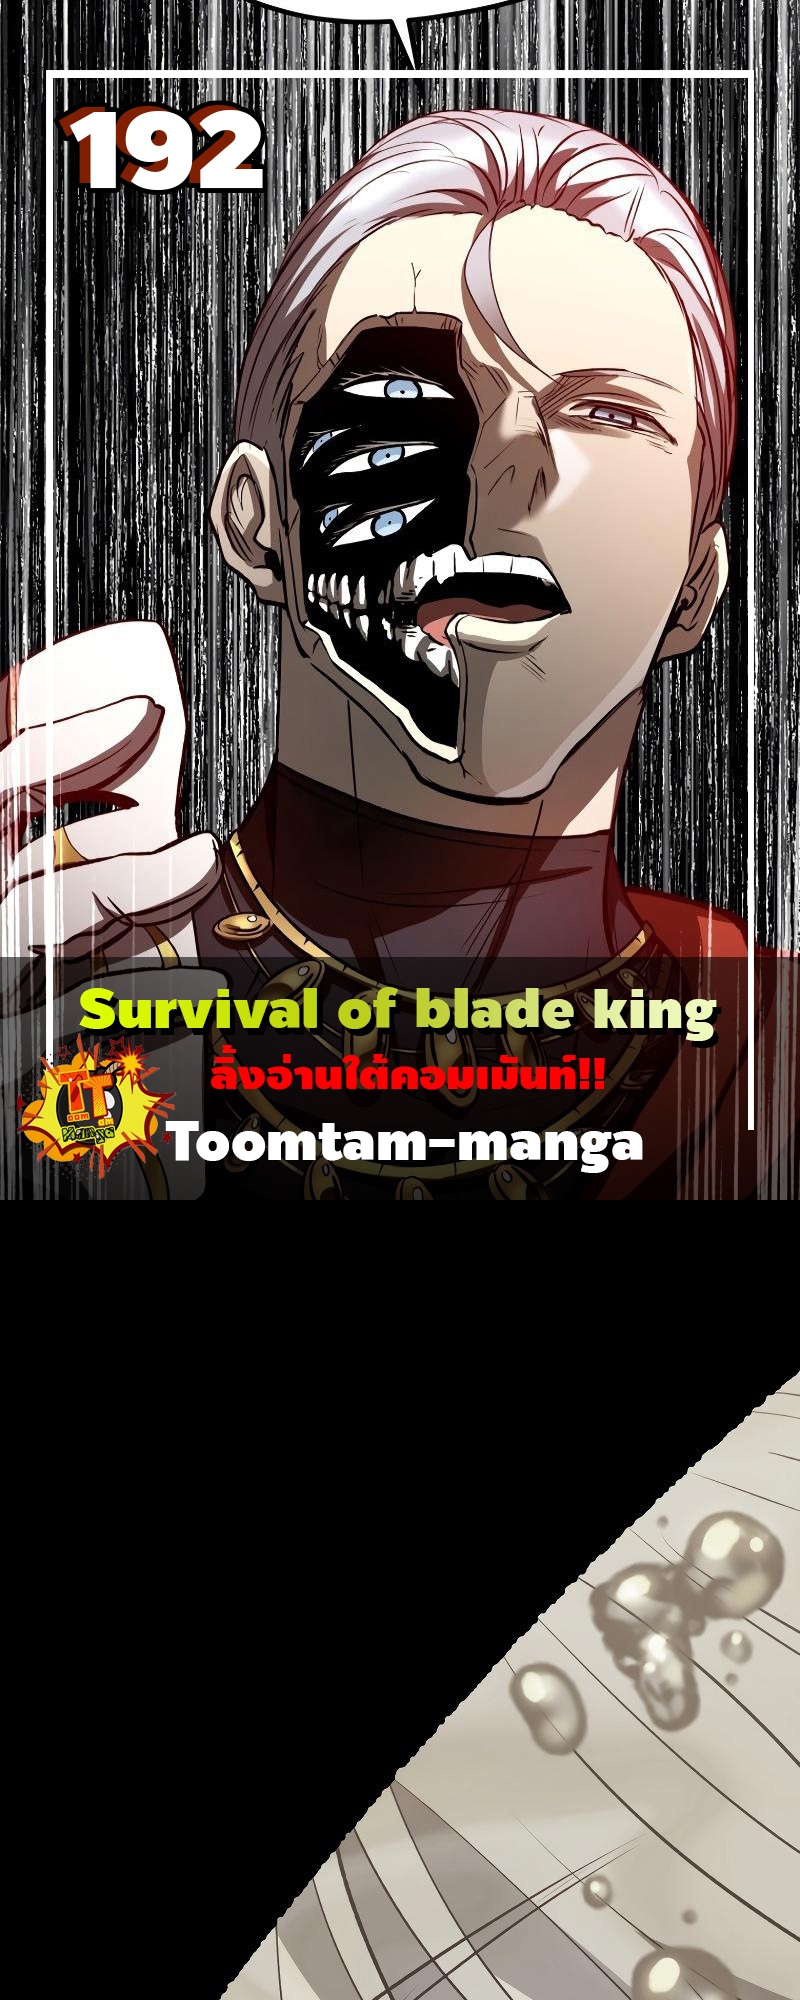 Survival of blade king 192 17 2 25670001